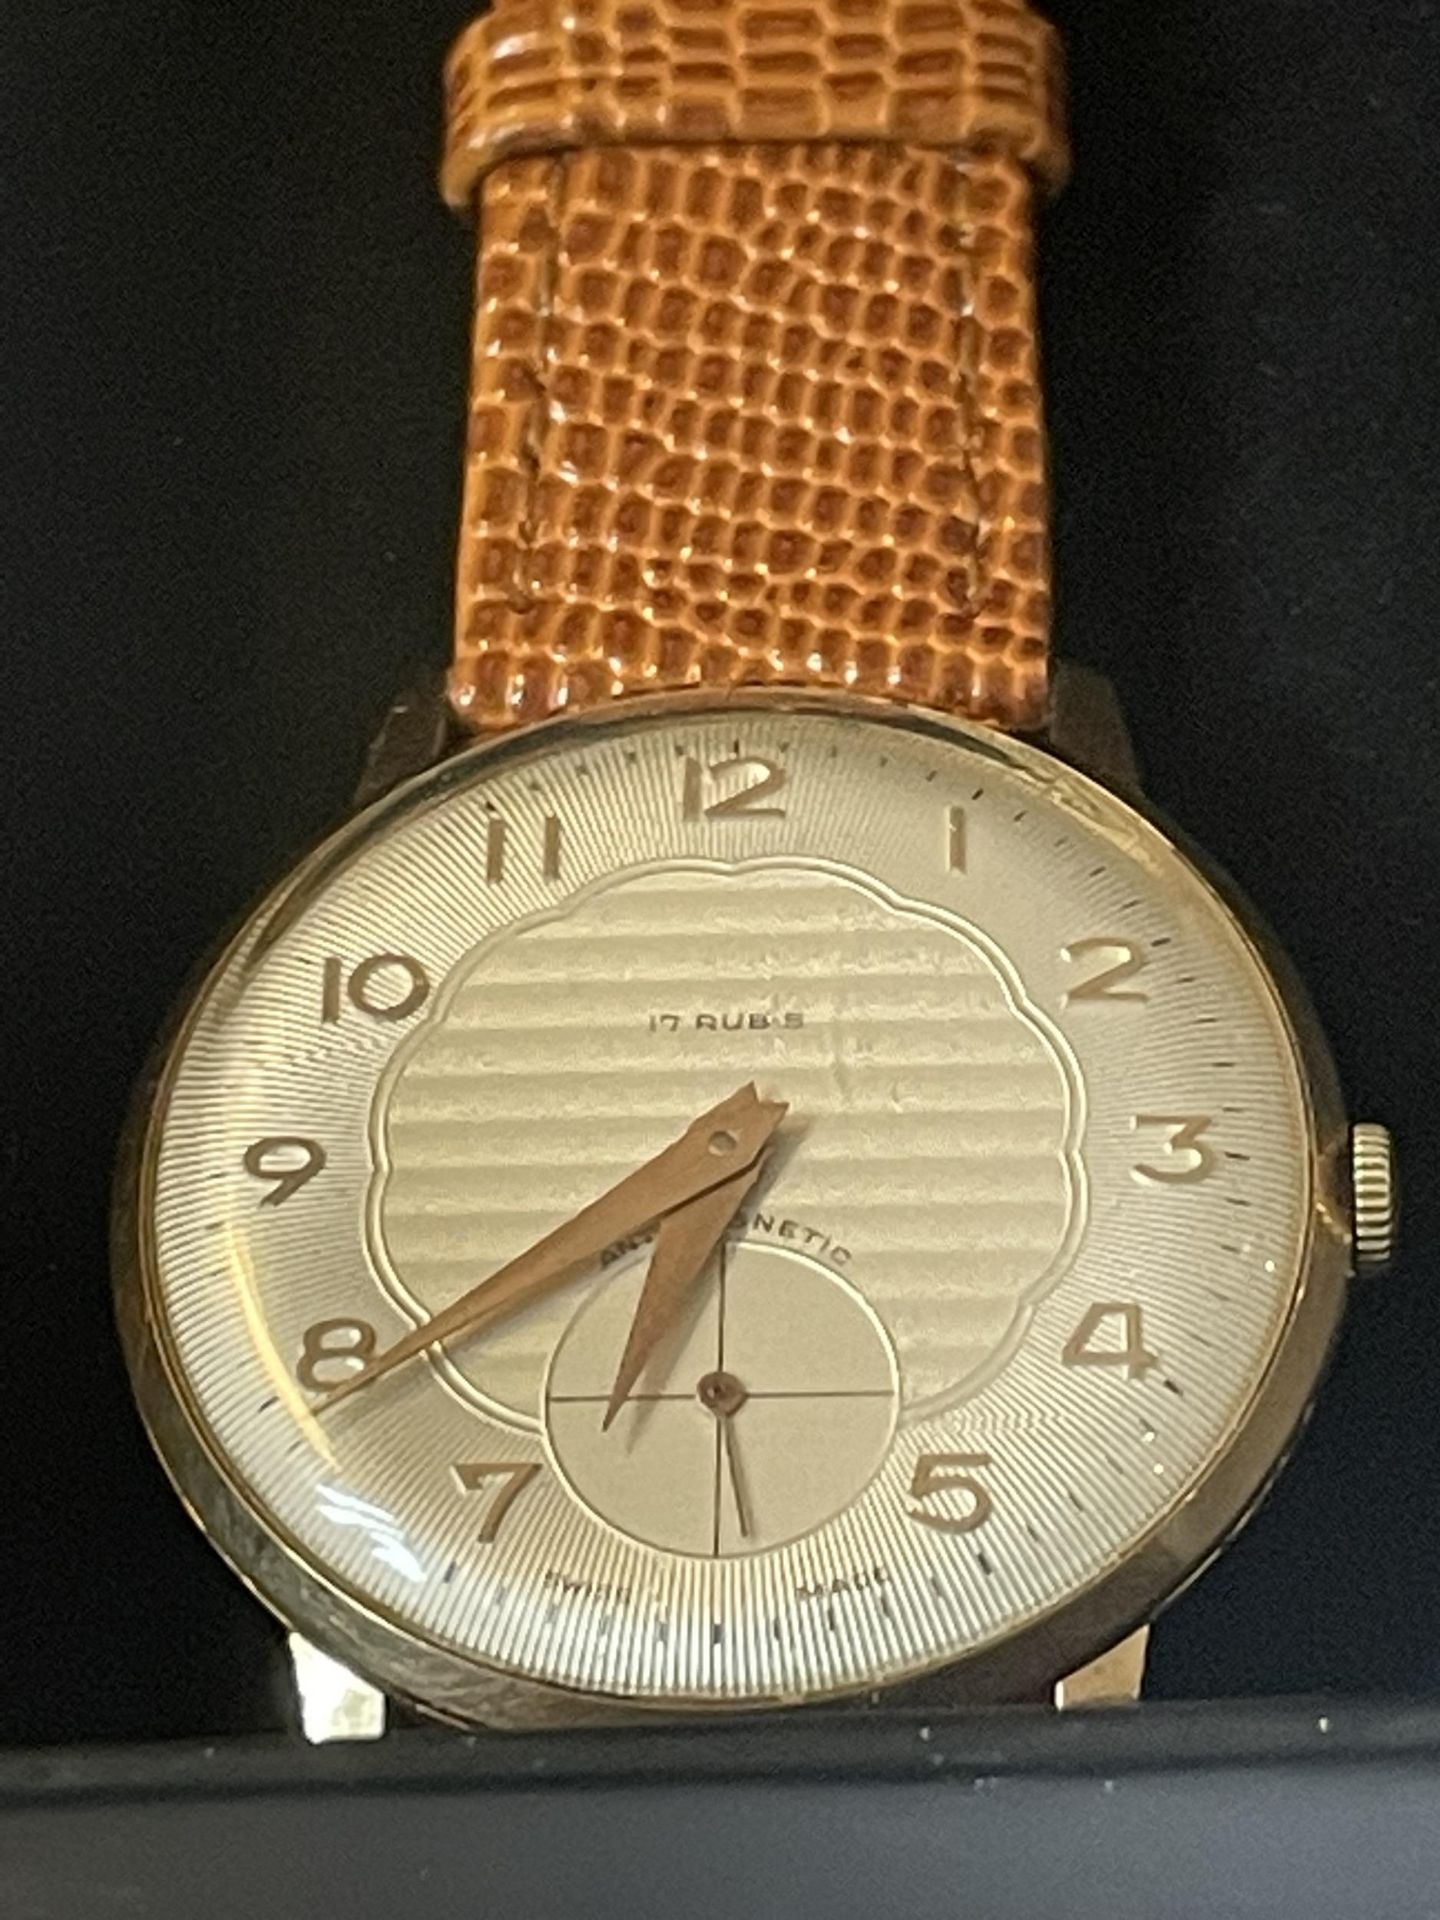 A GENTS VINTAGE GOLD PLATED 17 RUBIS WRIST WATCH WITH A PRESENTATION BOX SEEN WORKING BUT NO